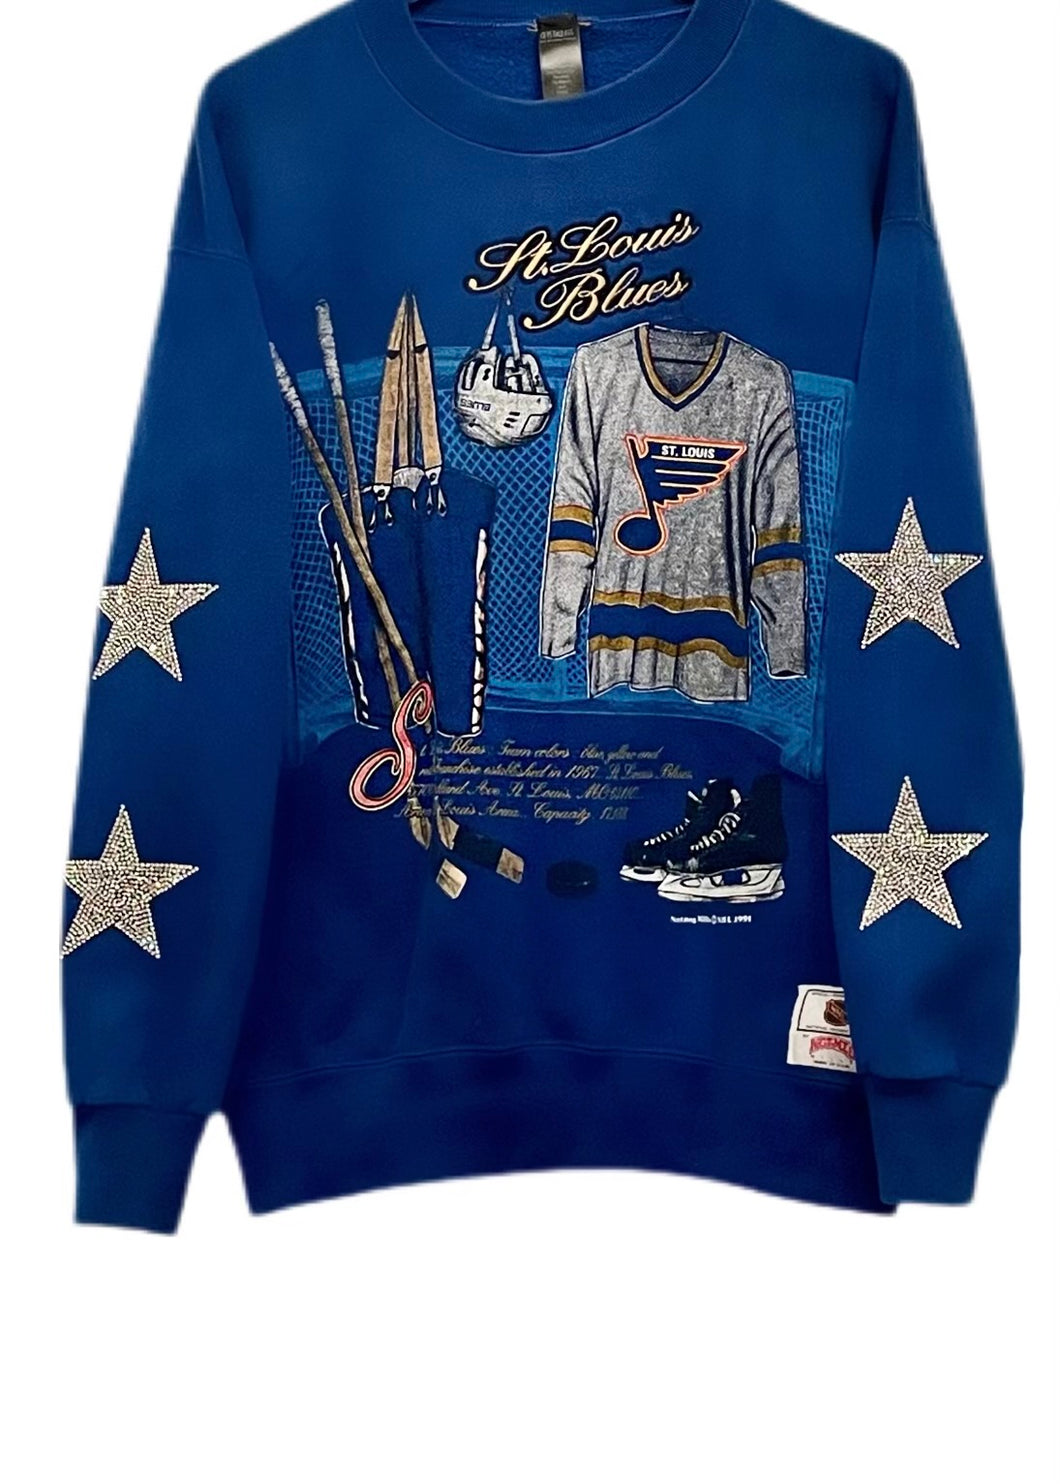 St. Louis Blues, NHL One of a KIND Vintage Sweatshirt with Crystal Star Design